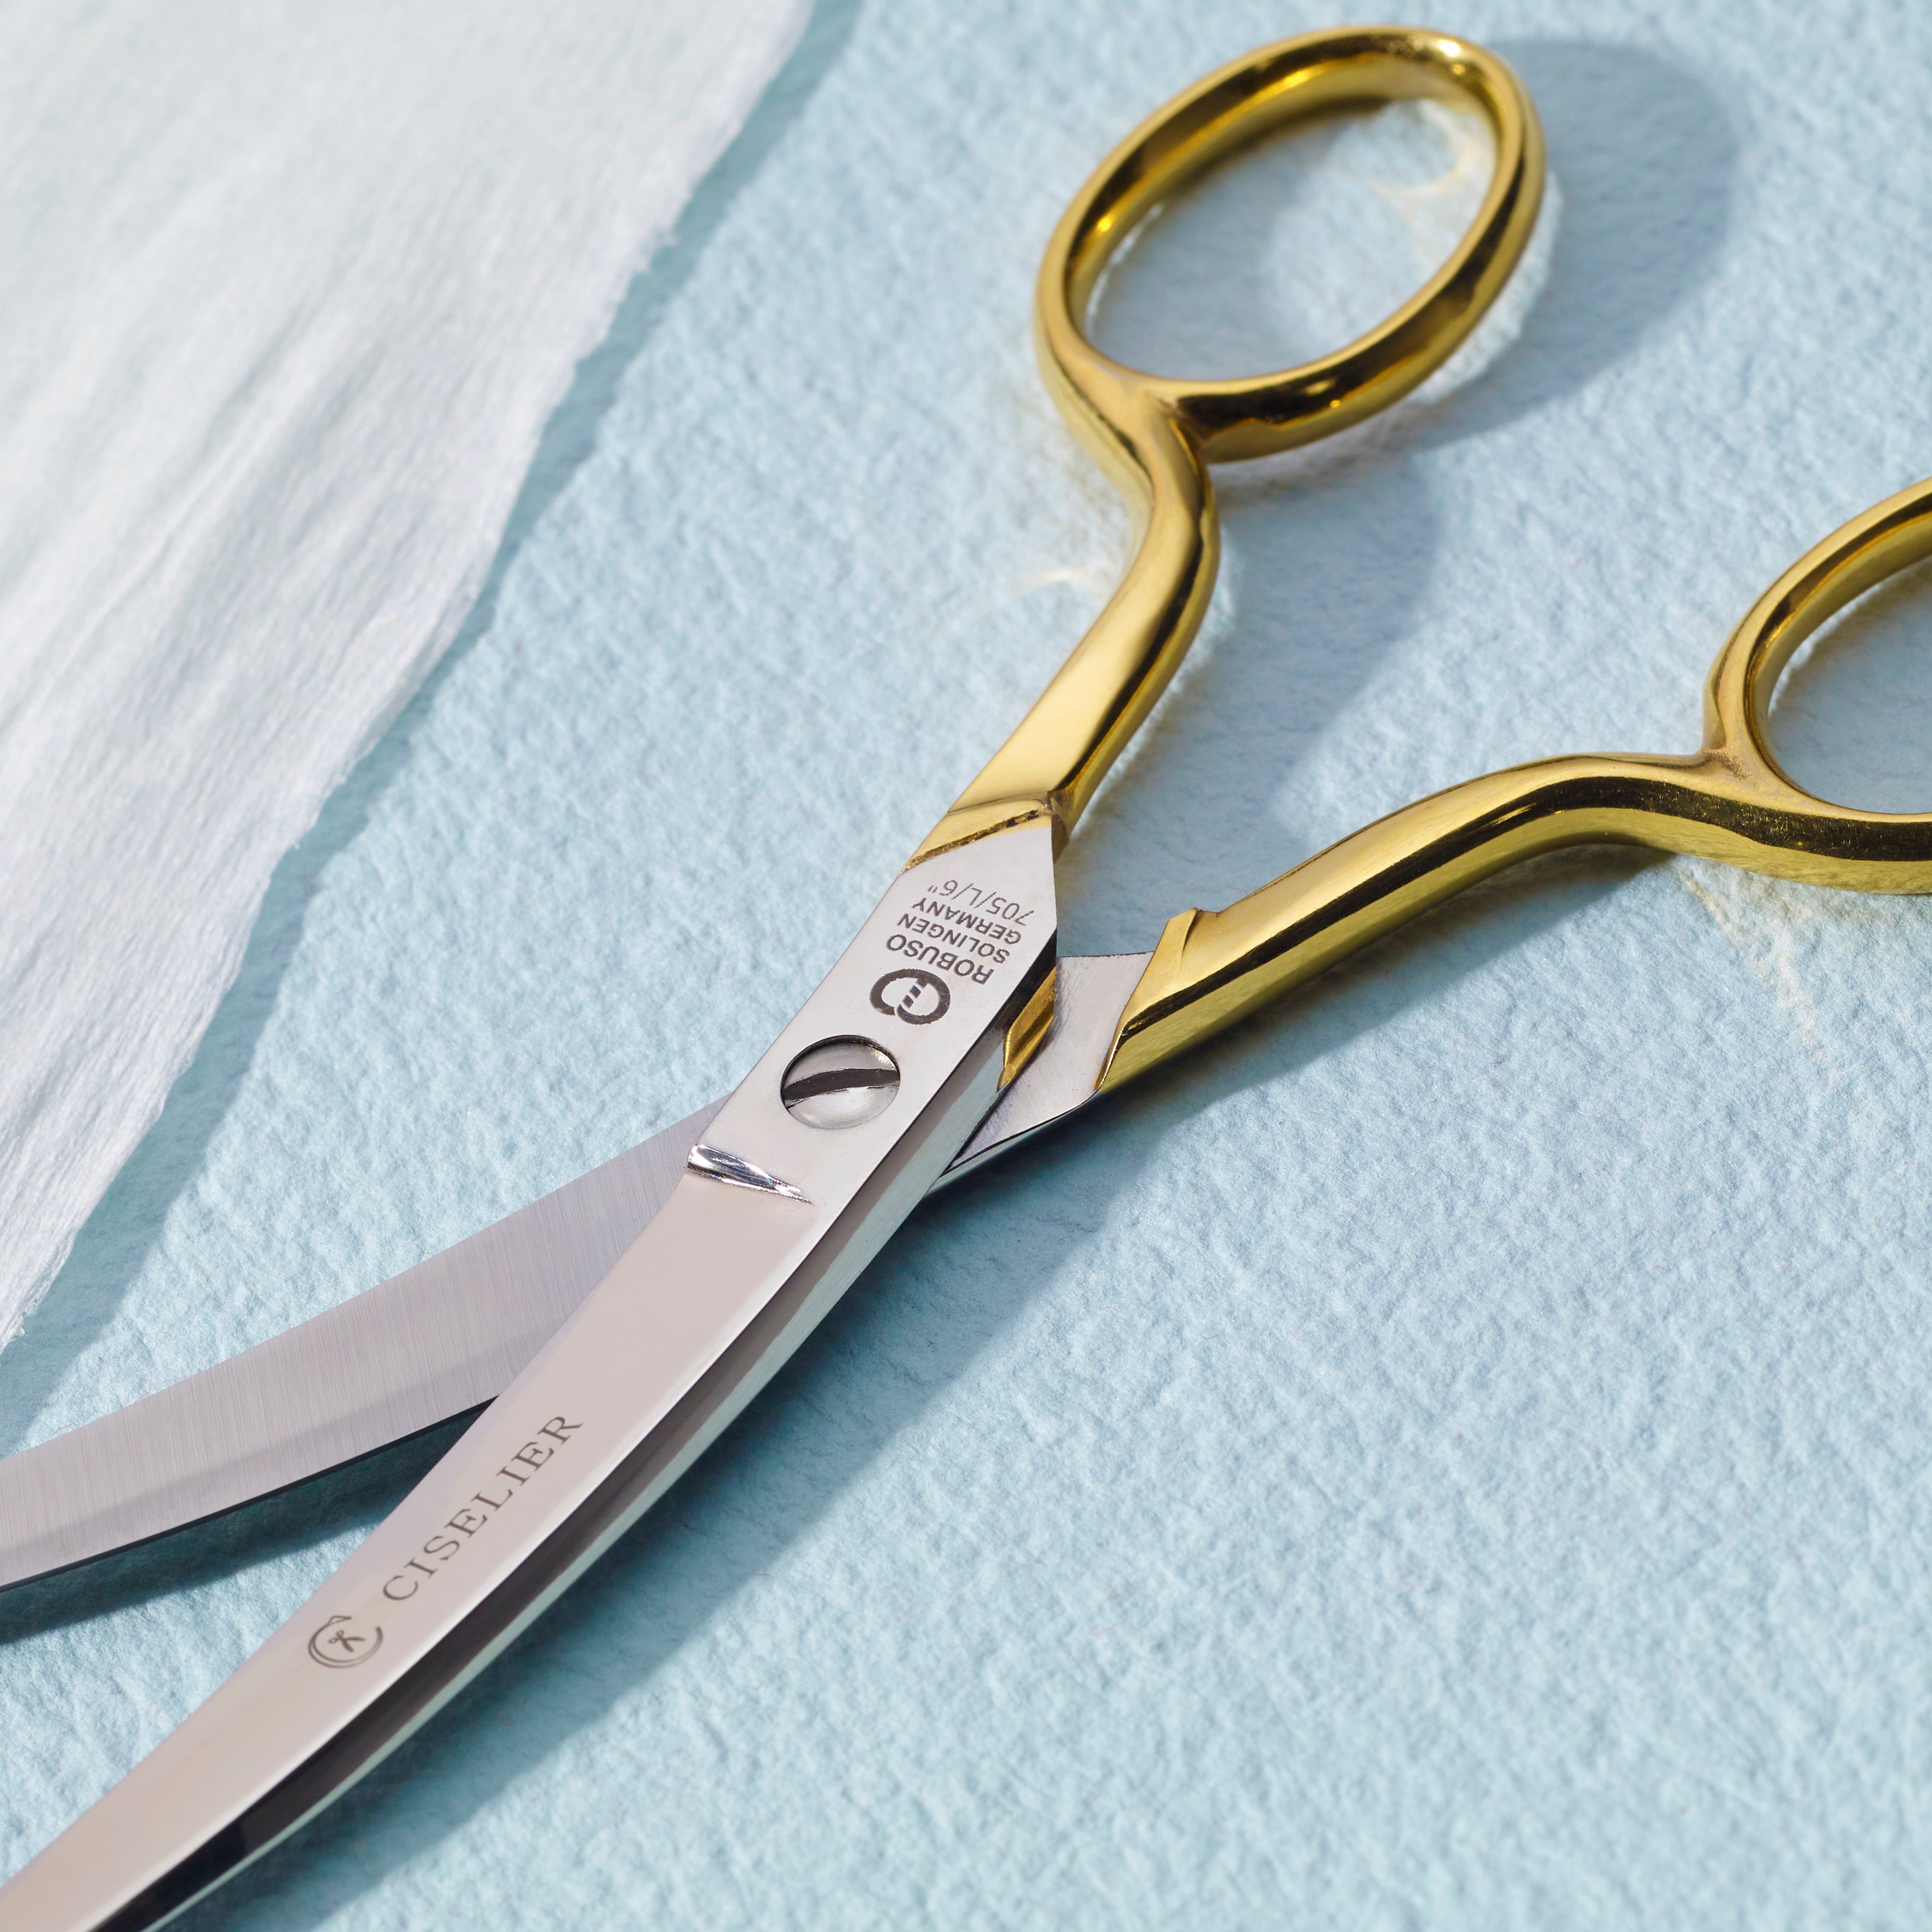 Small Sharp Scissors For Sewing Embroidery Crafts 4.5 Stainless Steel  Straight